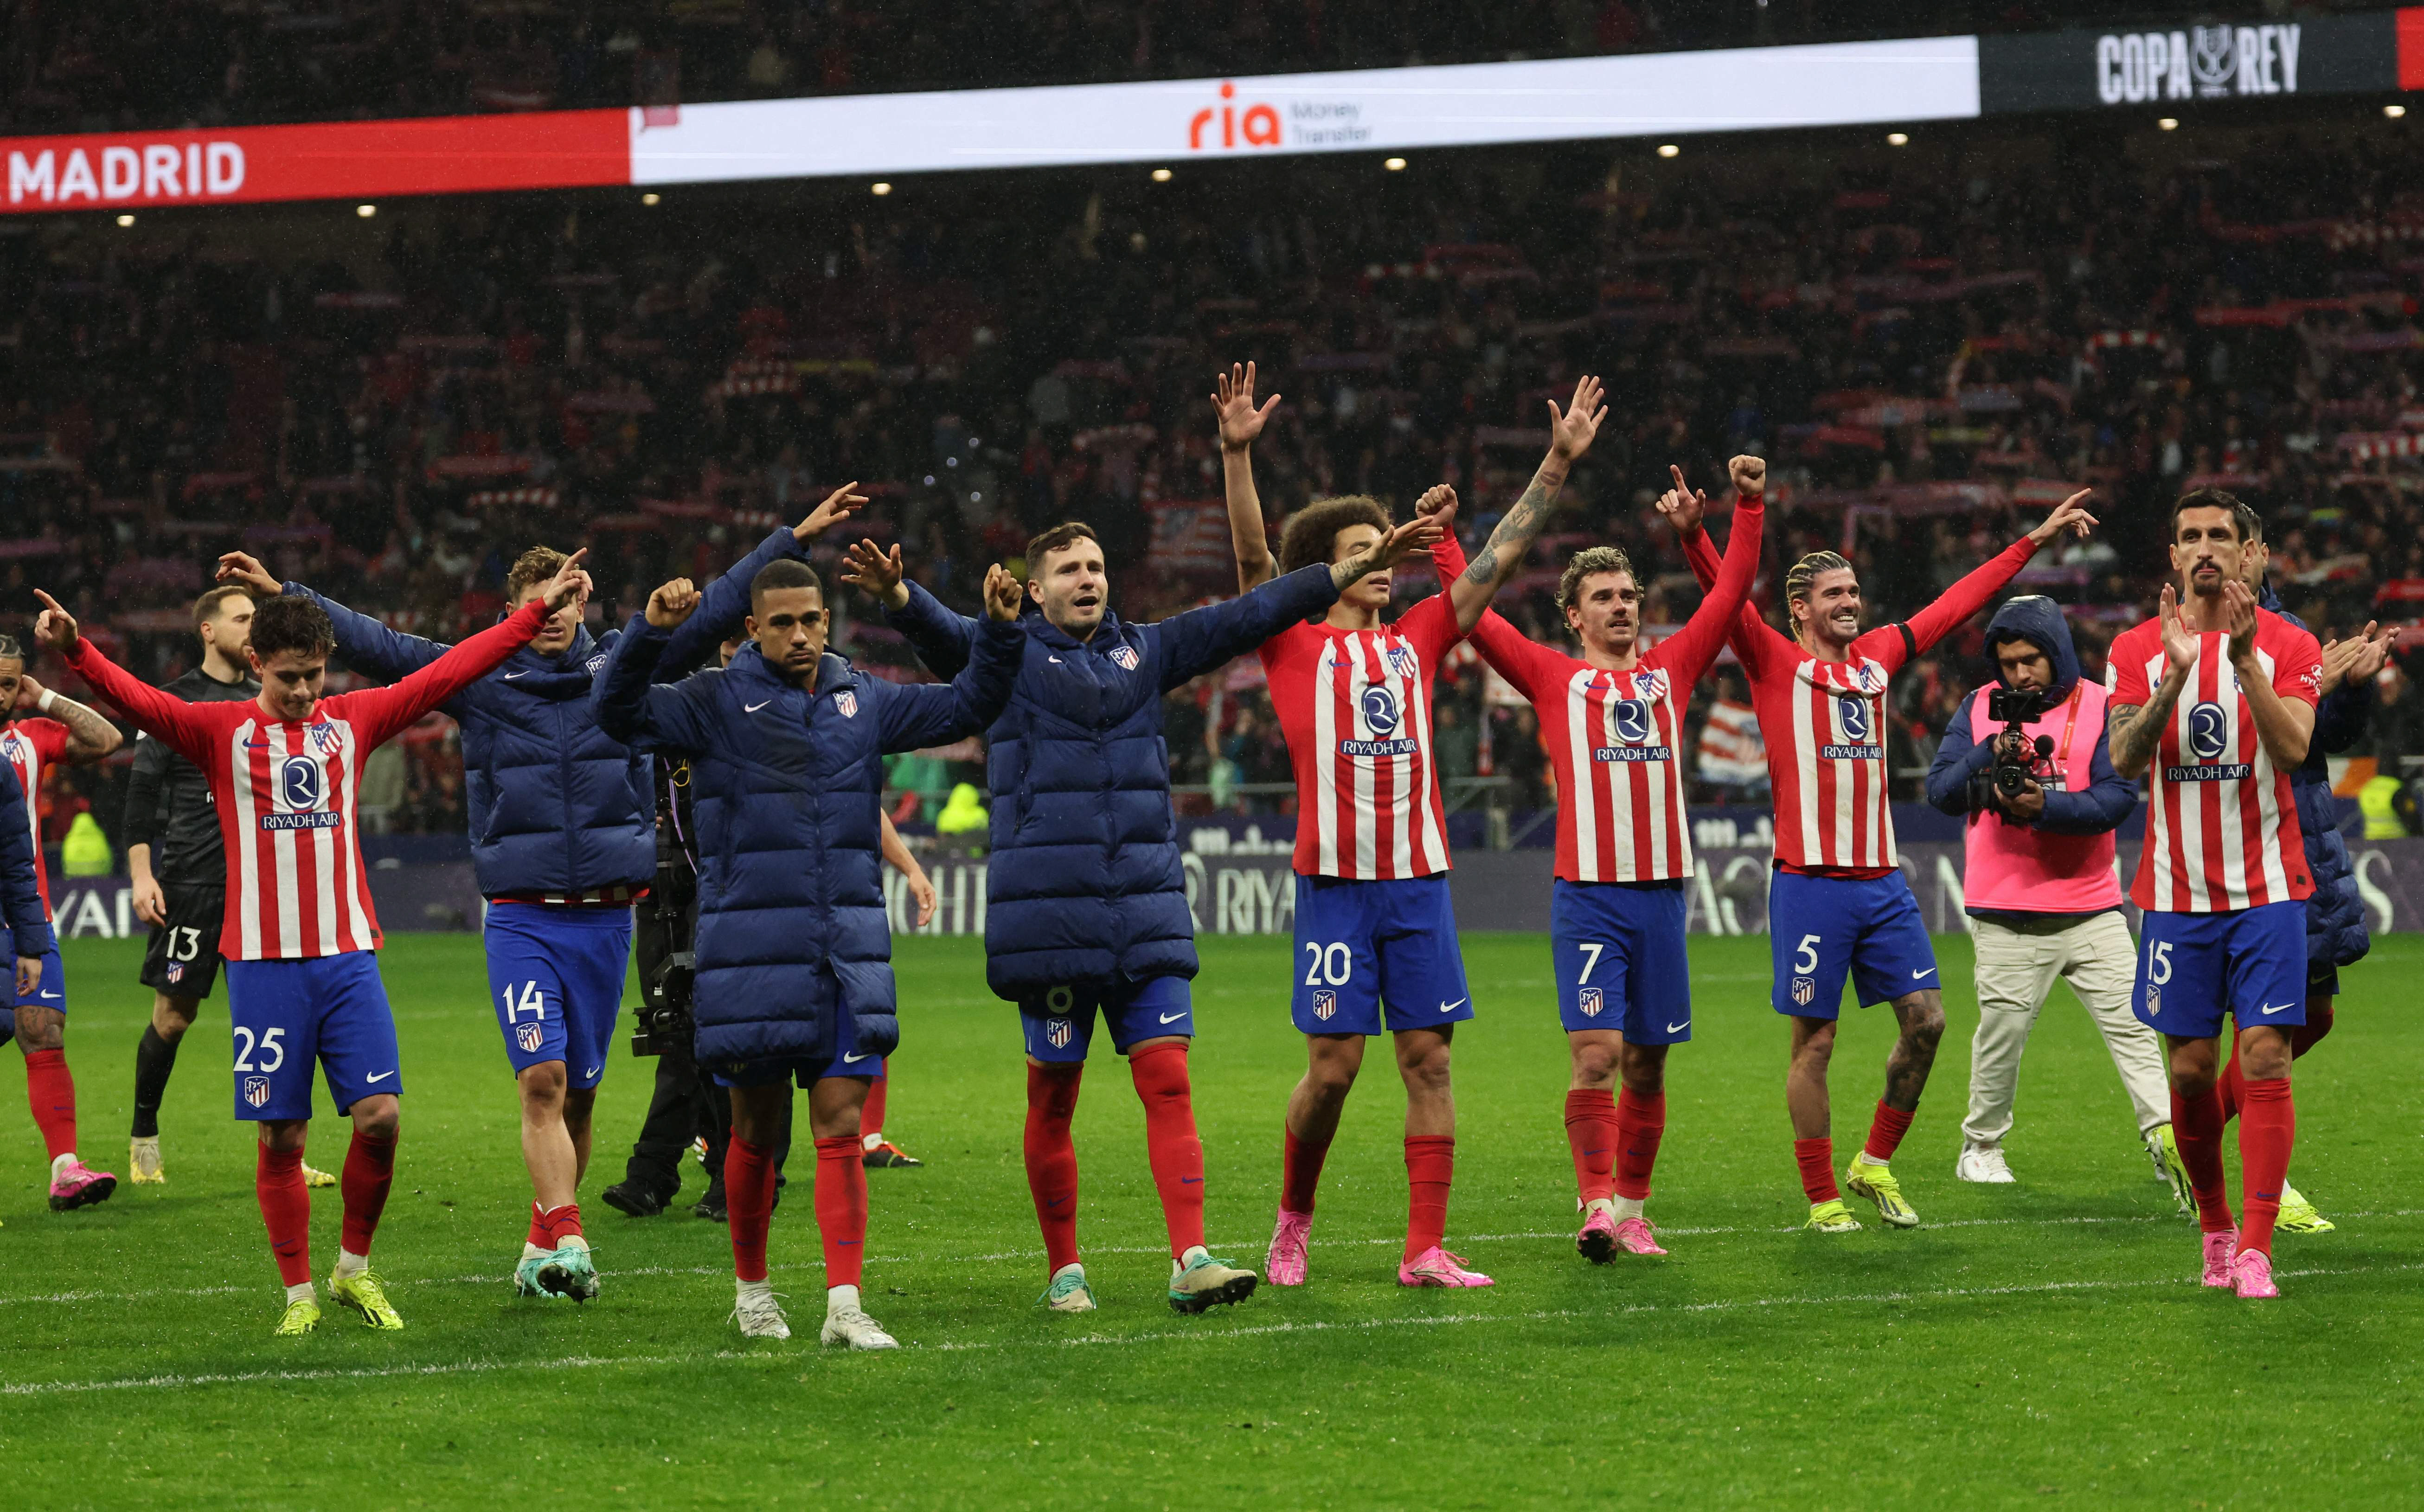 atletico madrid players celebrate their at the end of the spanish copa del rey king s cup football match against real madrid at the metropolitano stadium photo afp